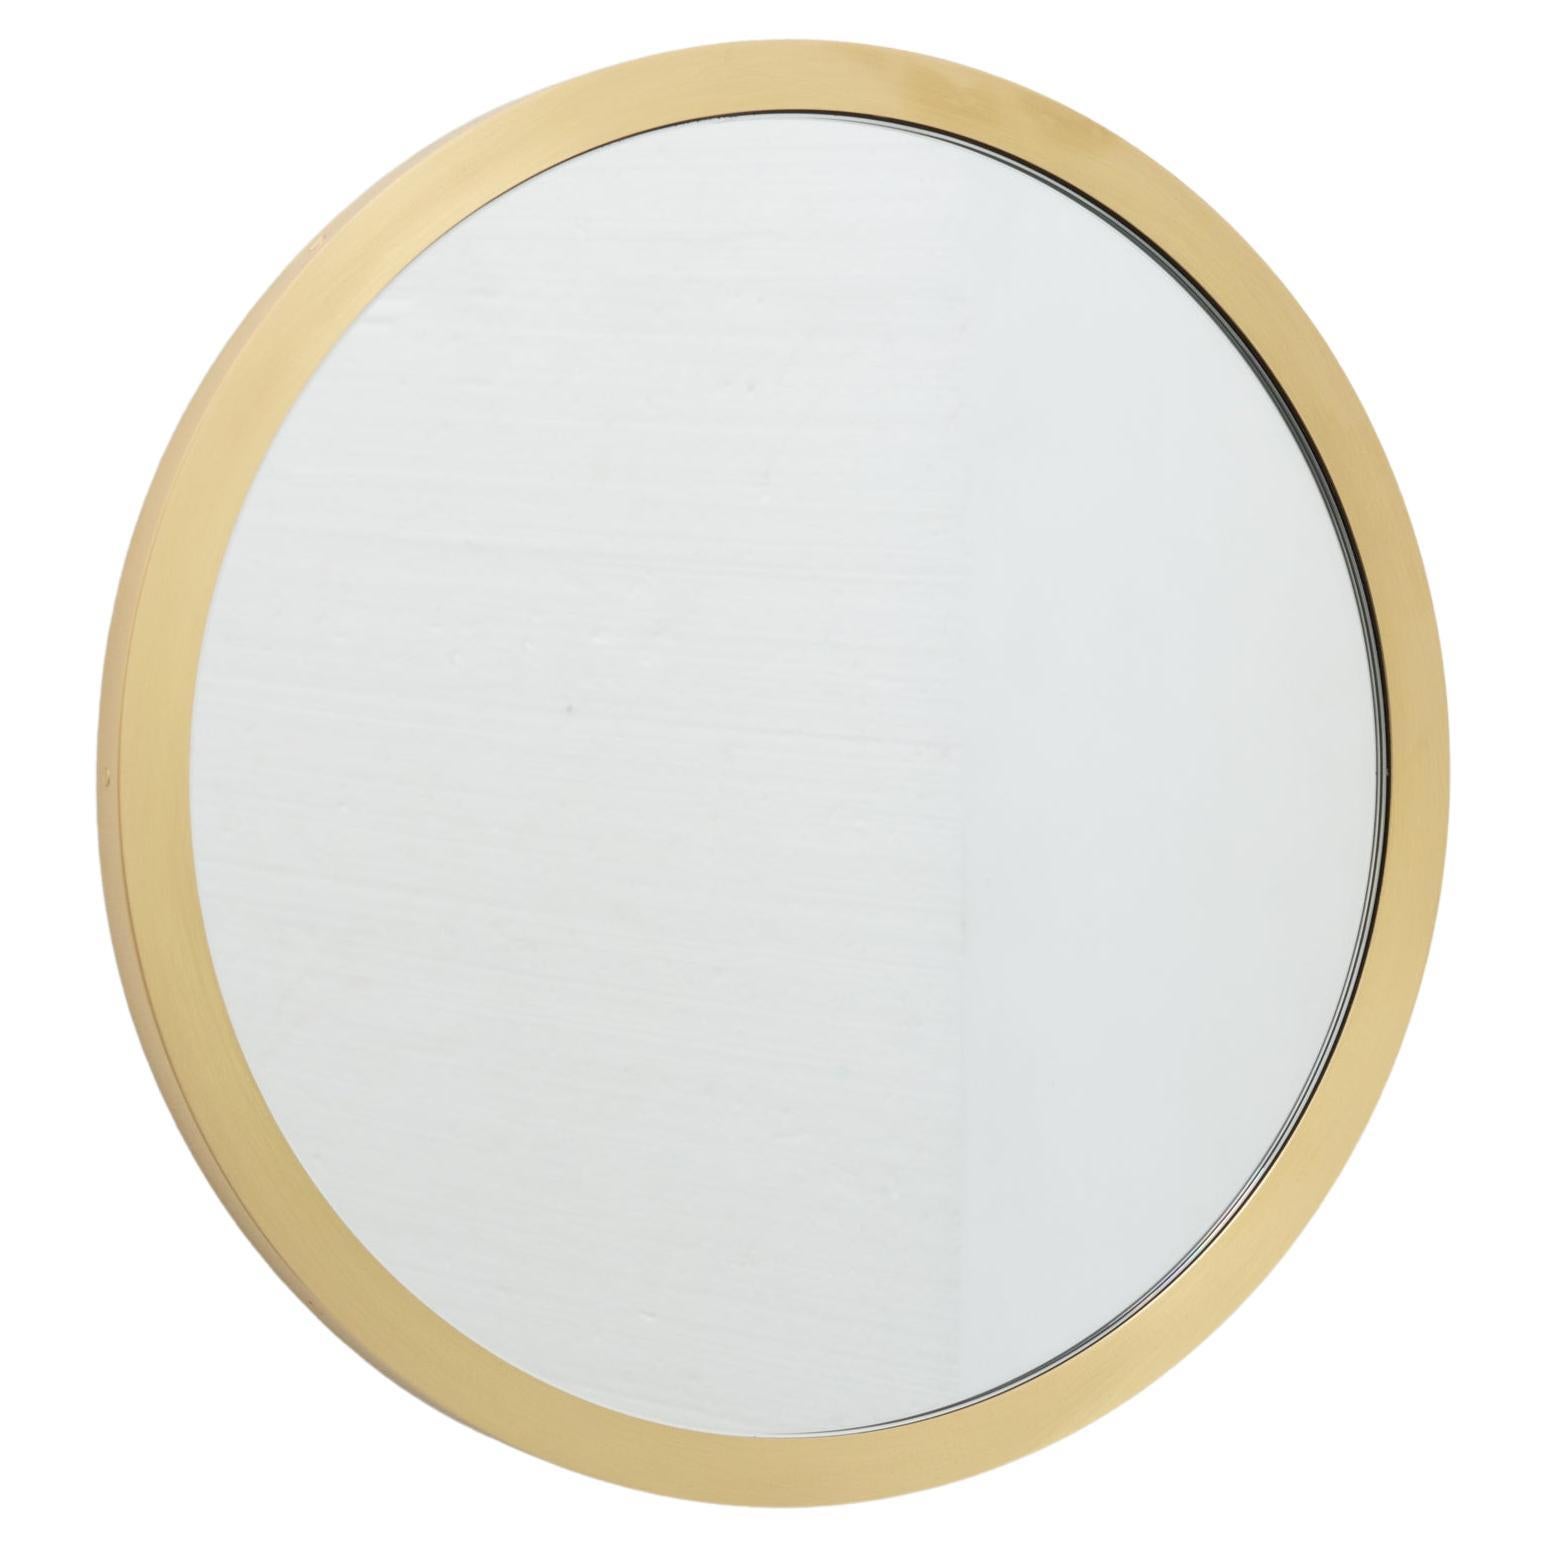 Orbis Round Mirror with Modern Full Brushed Brass Frame, XL For Sale